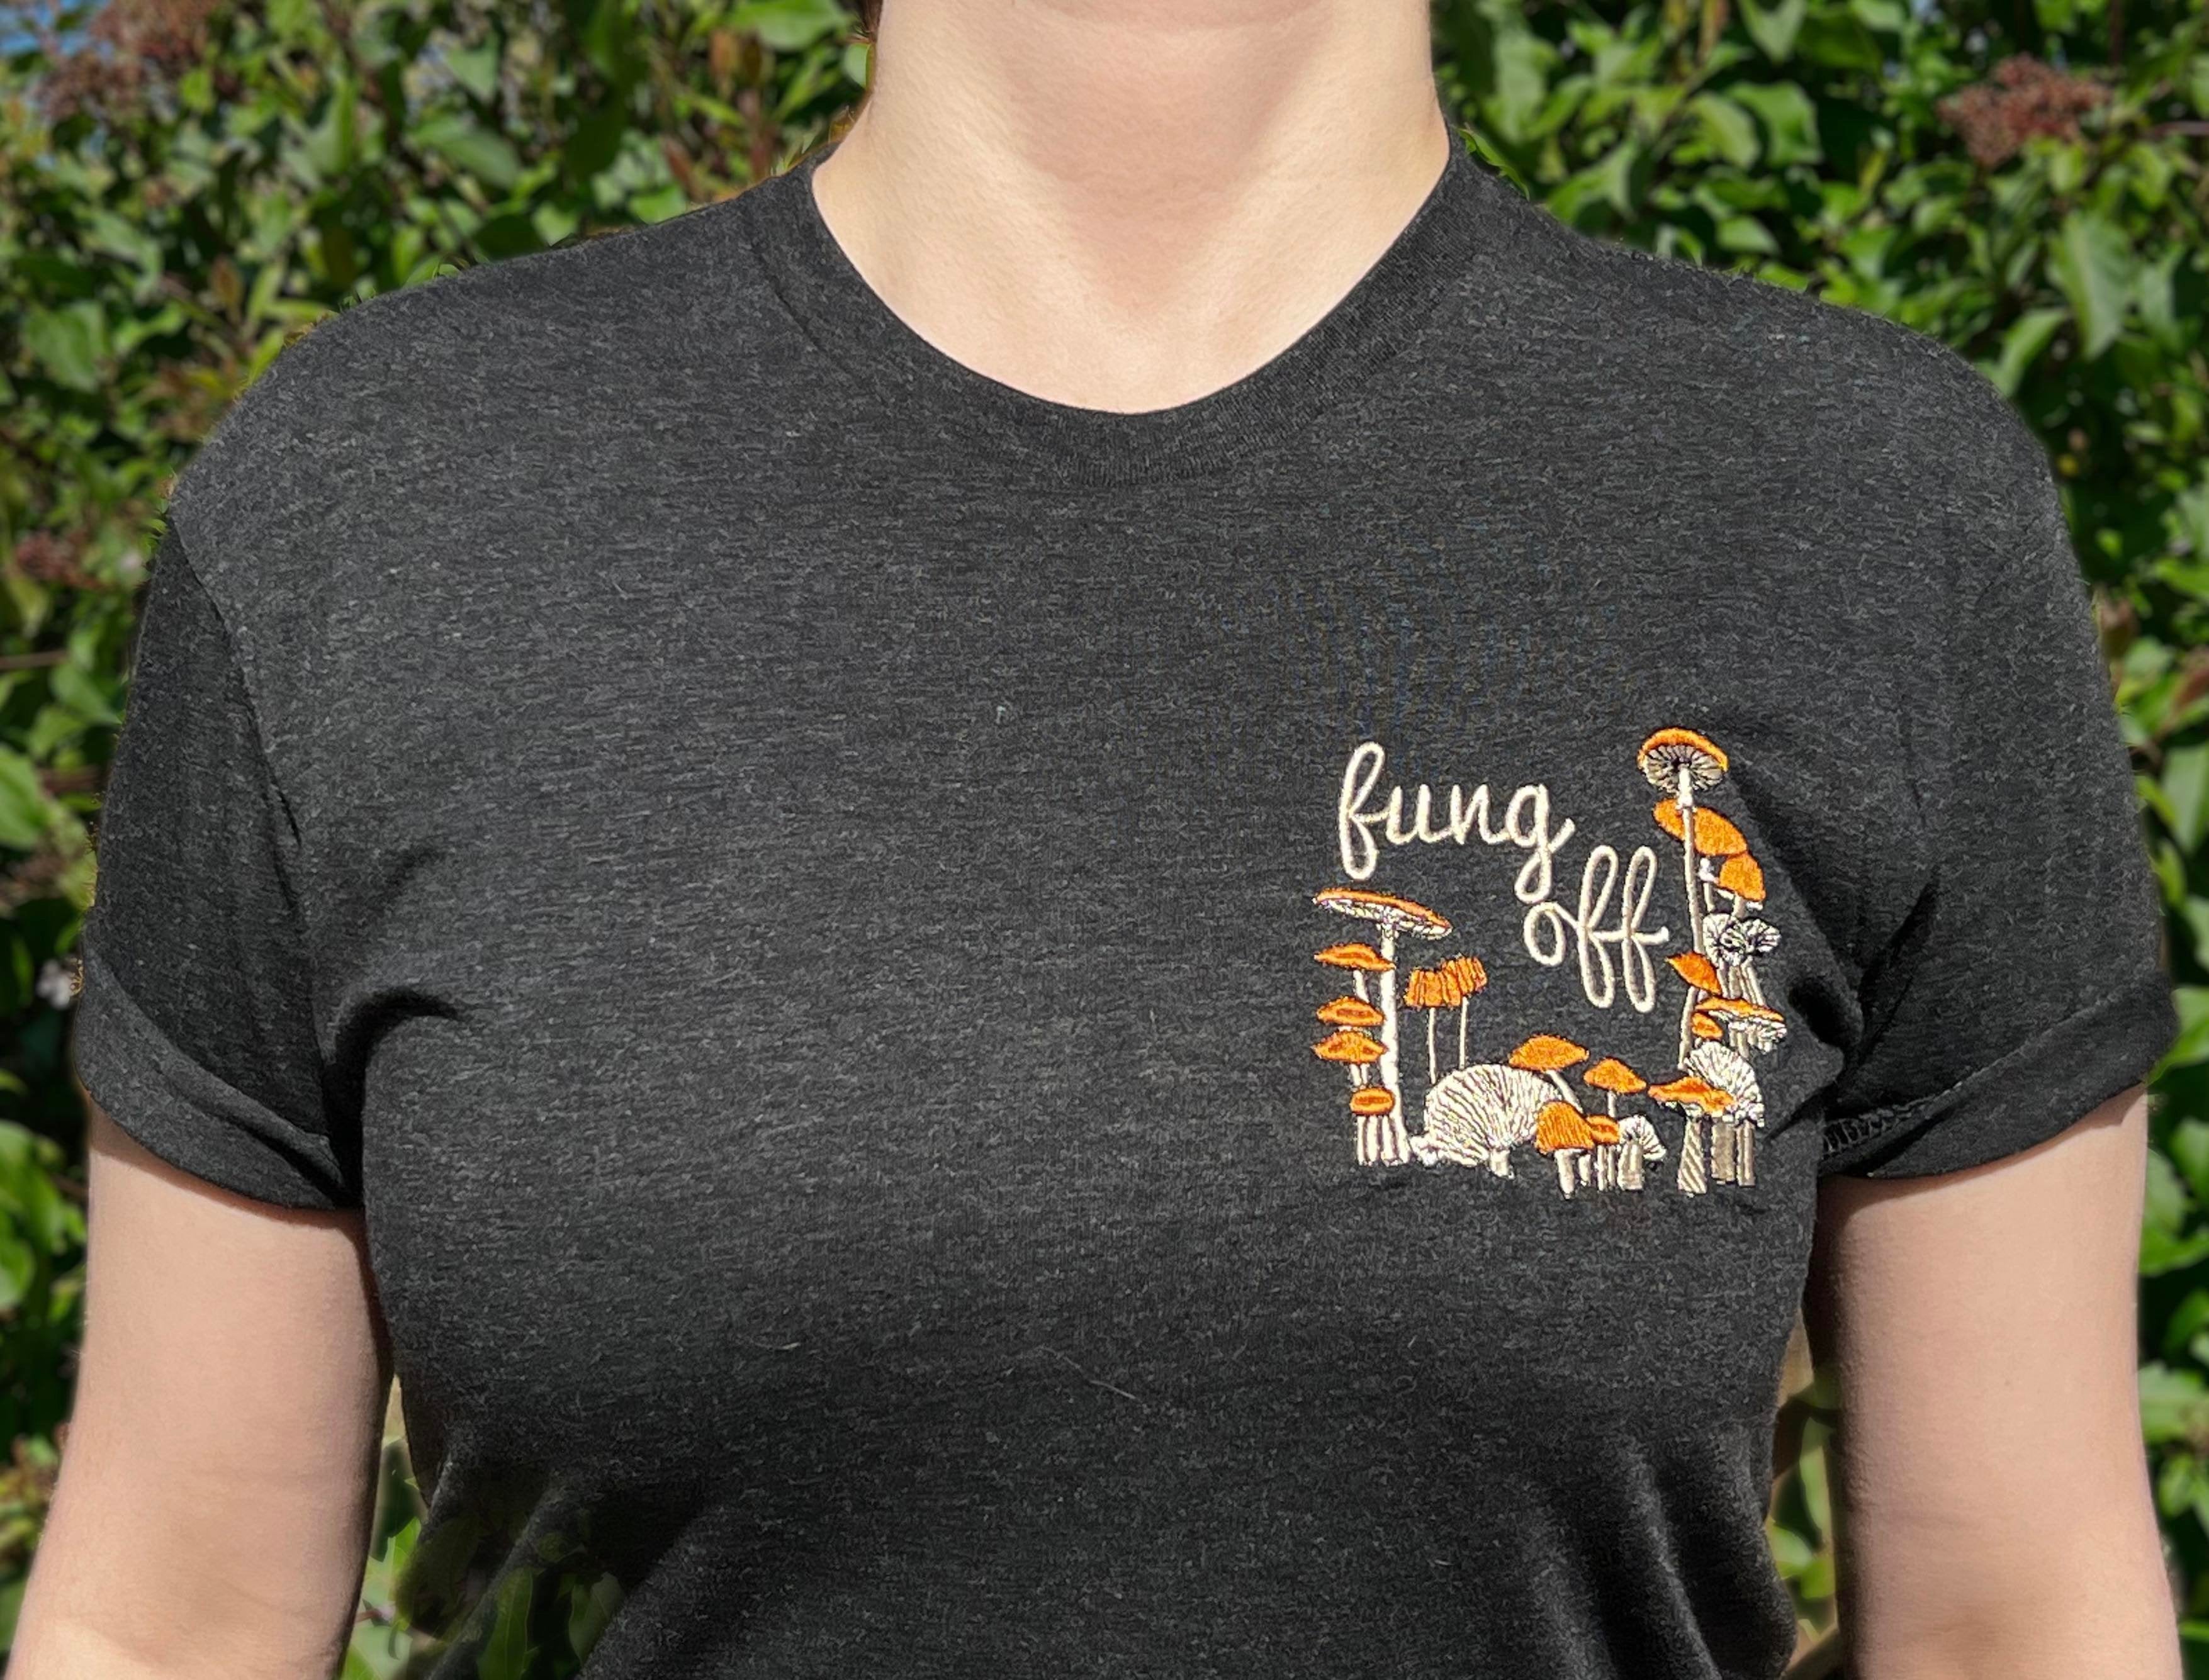 Fung Off Embroidered Black Tee Shirt Unisex